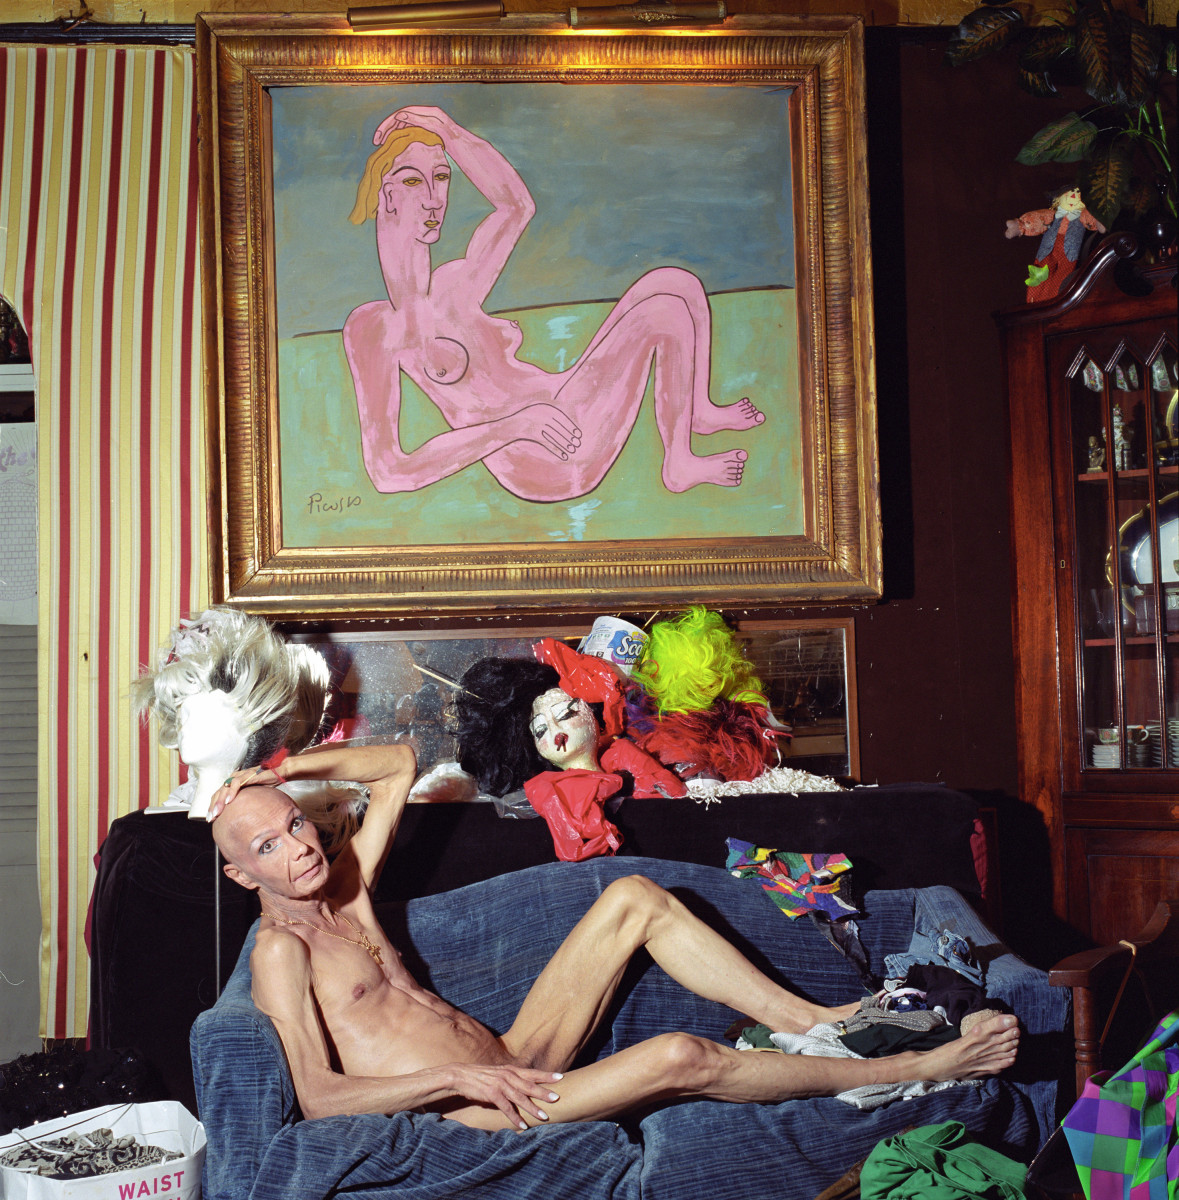 Zackary Drucker, &quot;5 East 73rd Street (Flawless nude),&quot; 2005, Digital pigment print, 30 x 30 inches